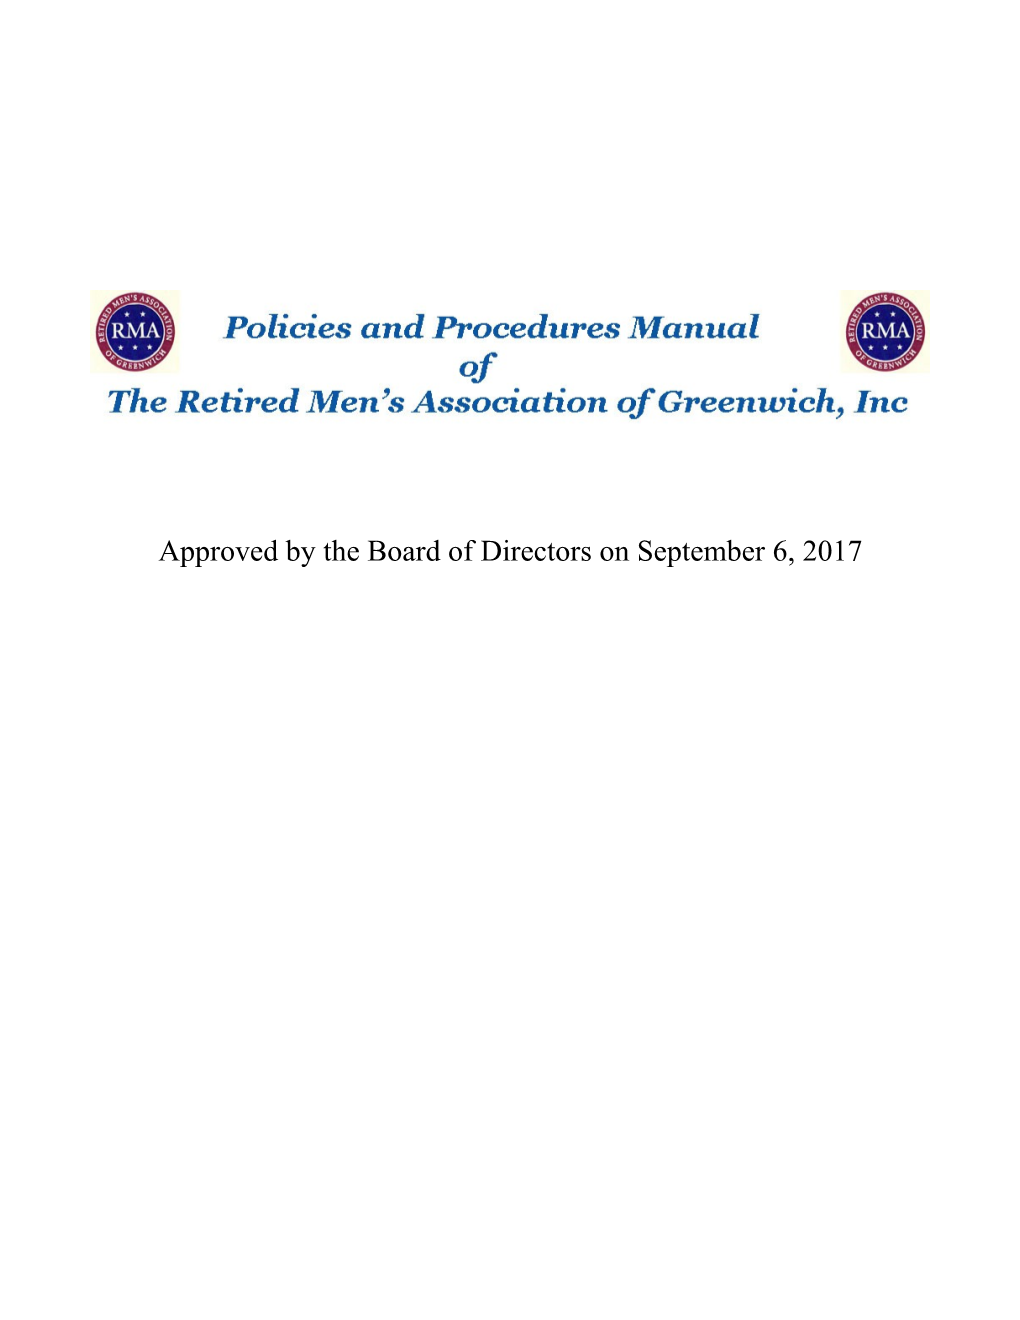 Approved by the Board of Directors Onseptember 6, 2017